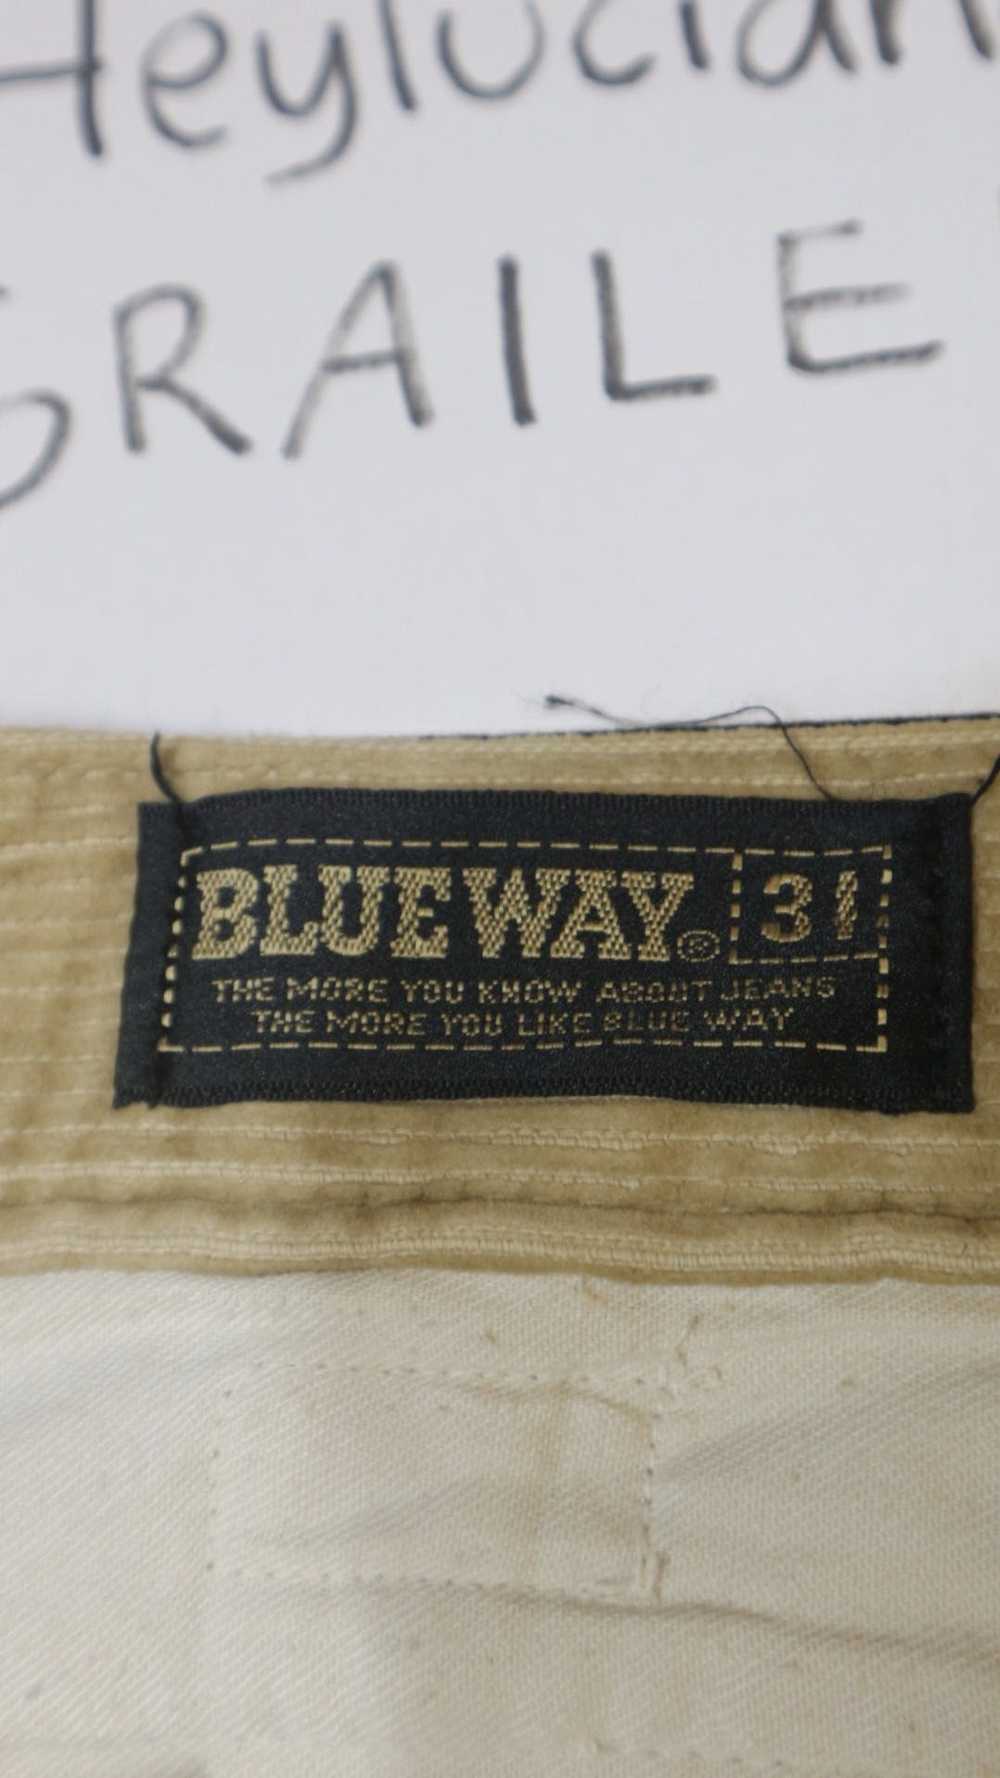 Japanese Brand Corduroy Pant by Blue Way - image 7